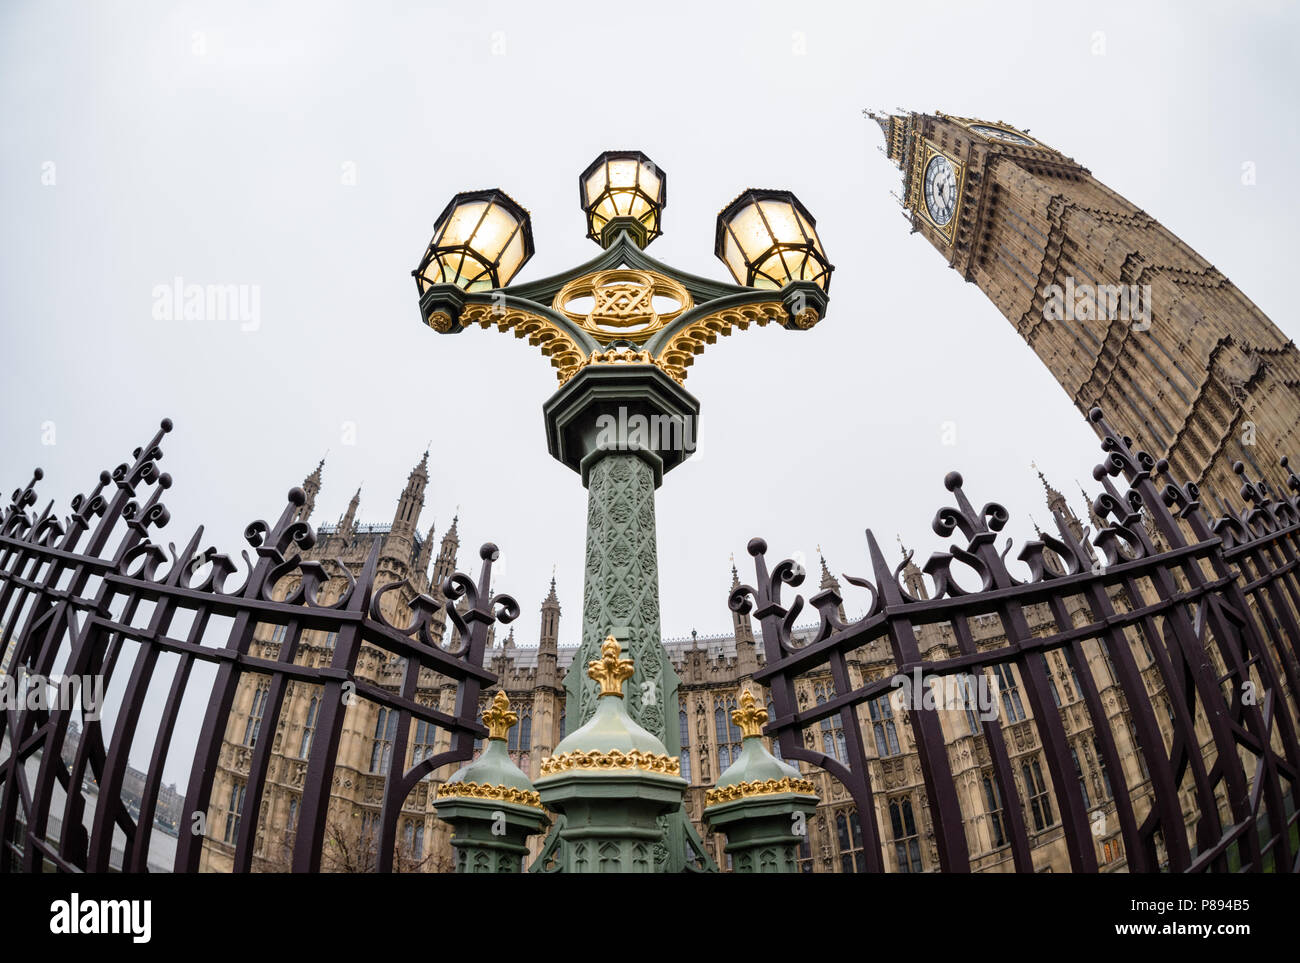 Distorted view of Big Ben and Houses of Parliament in London from looking up and using a wide angle lens Stock Photo